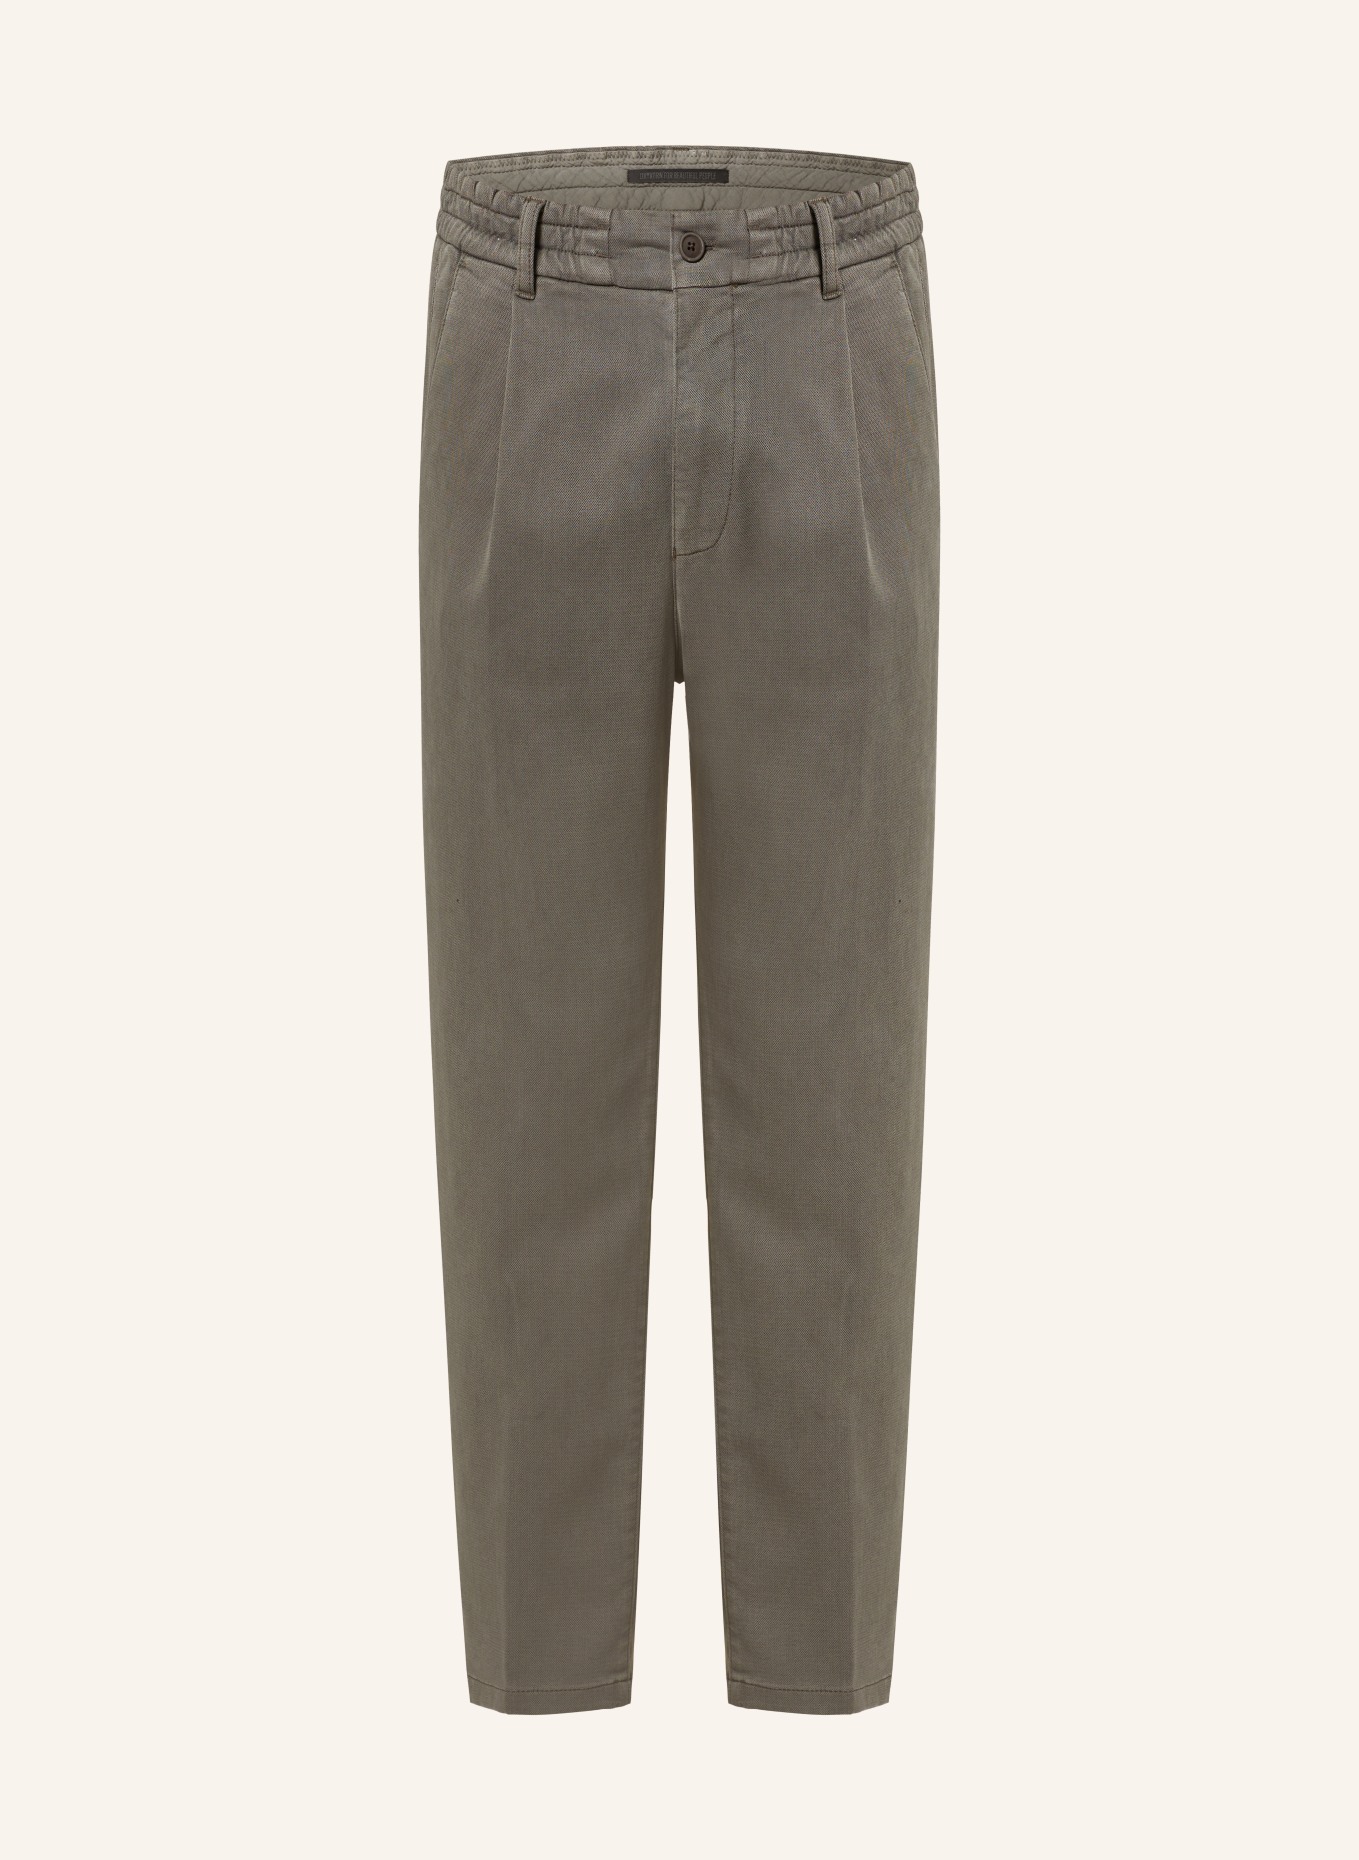 DRYKORN Chino CHASY Relaxed Fit, Farbe: GRAU (Bild 1)